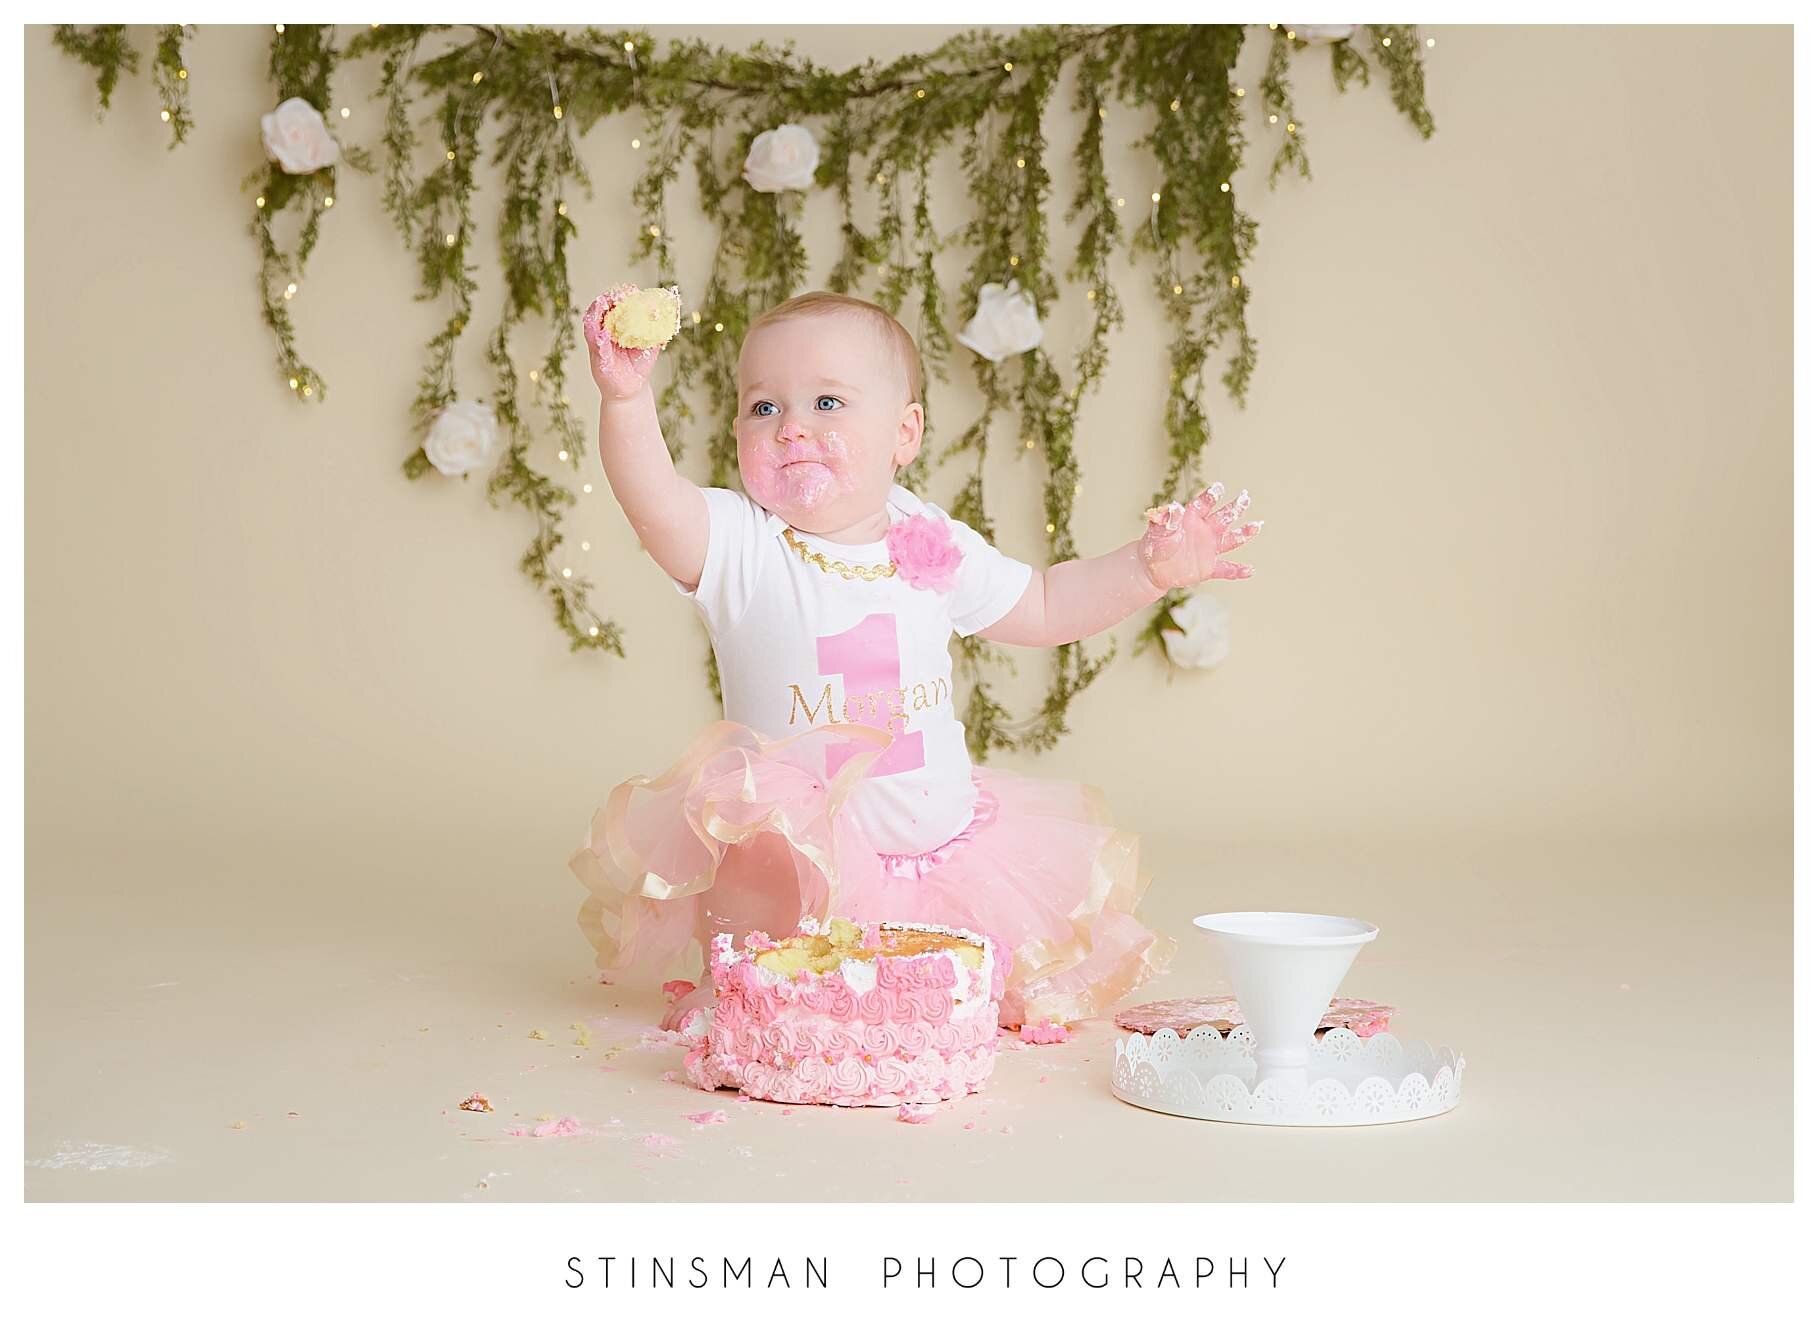 baby-girl-smashing-a-cake-for-her-first-birthday-in-photo-studio.jpeg